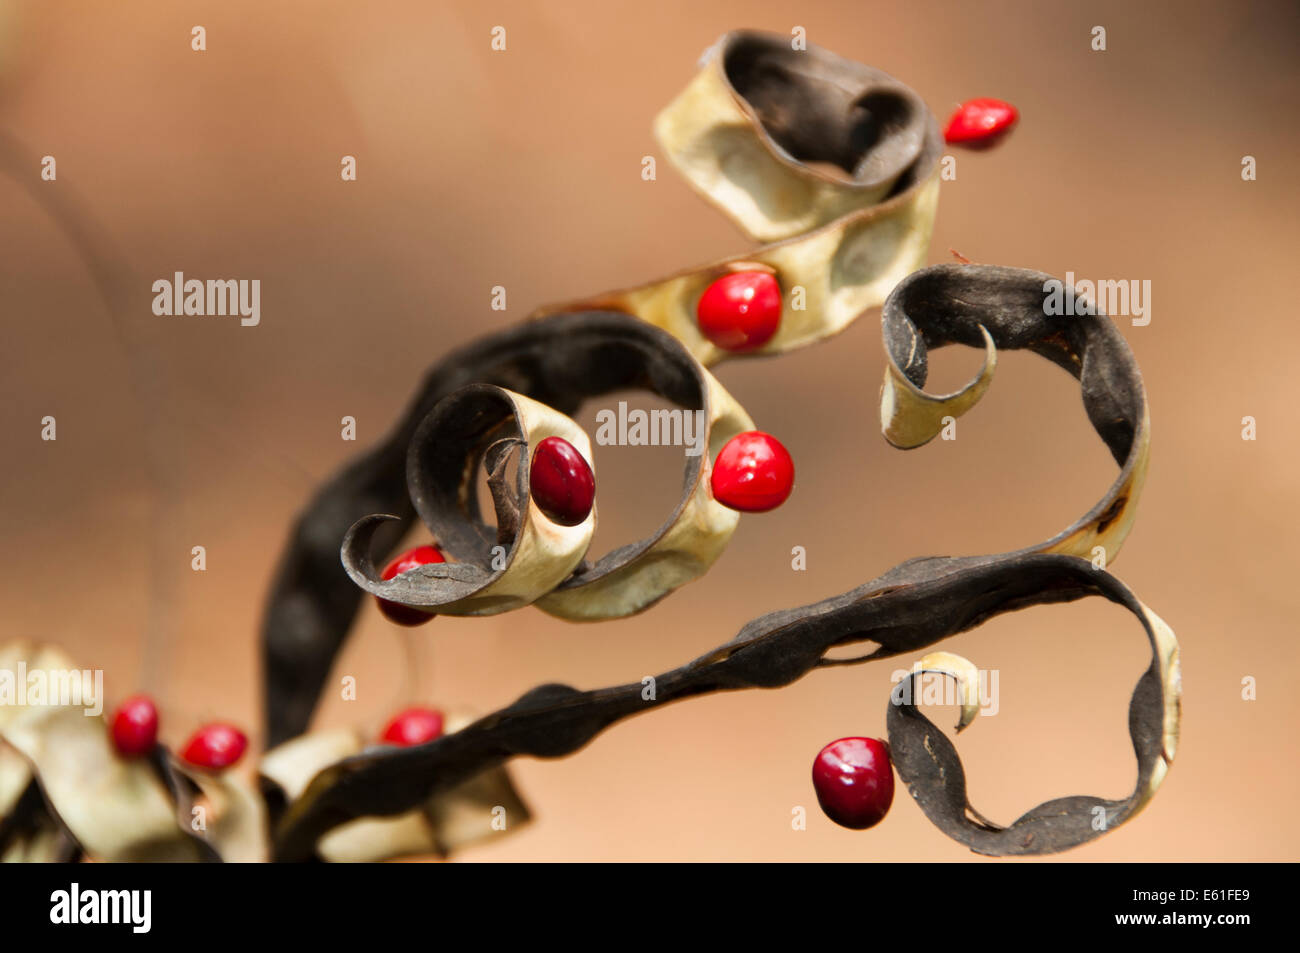 Shiny red Circassian seeds hanging from tree Stock Photo